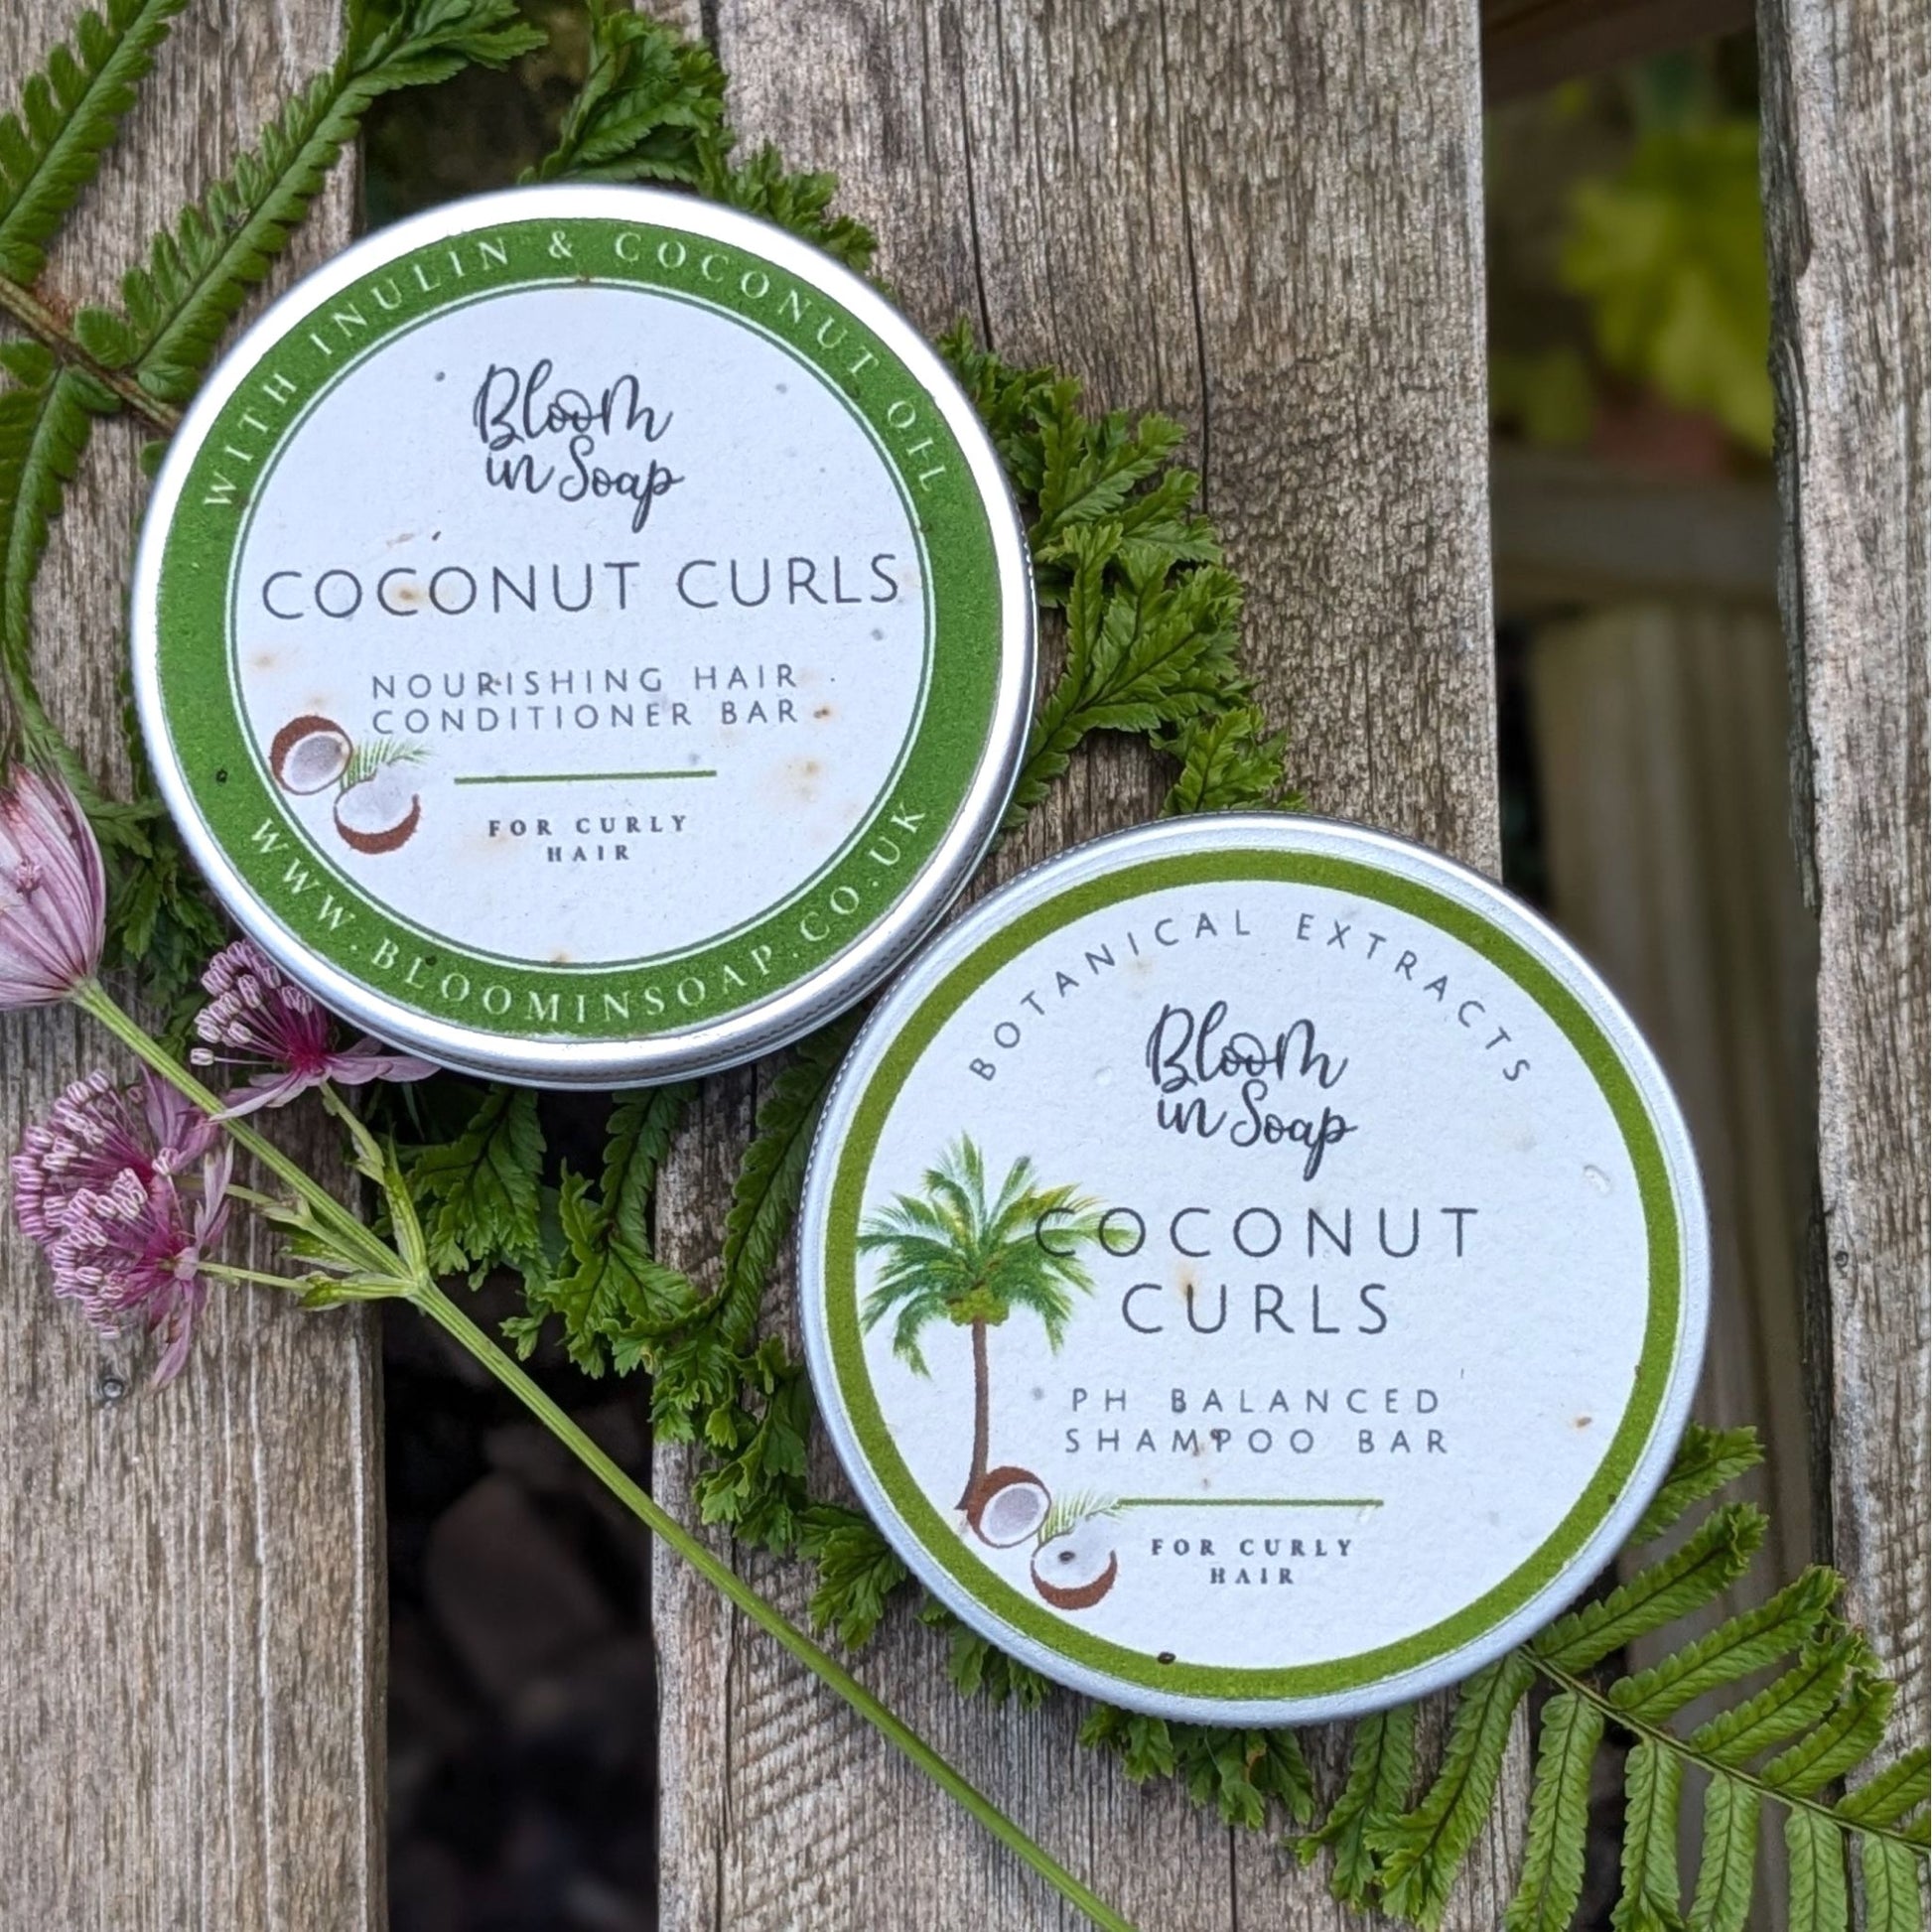 Coconut Curls conditioning shampoo bar and hair conditioner bar